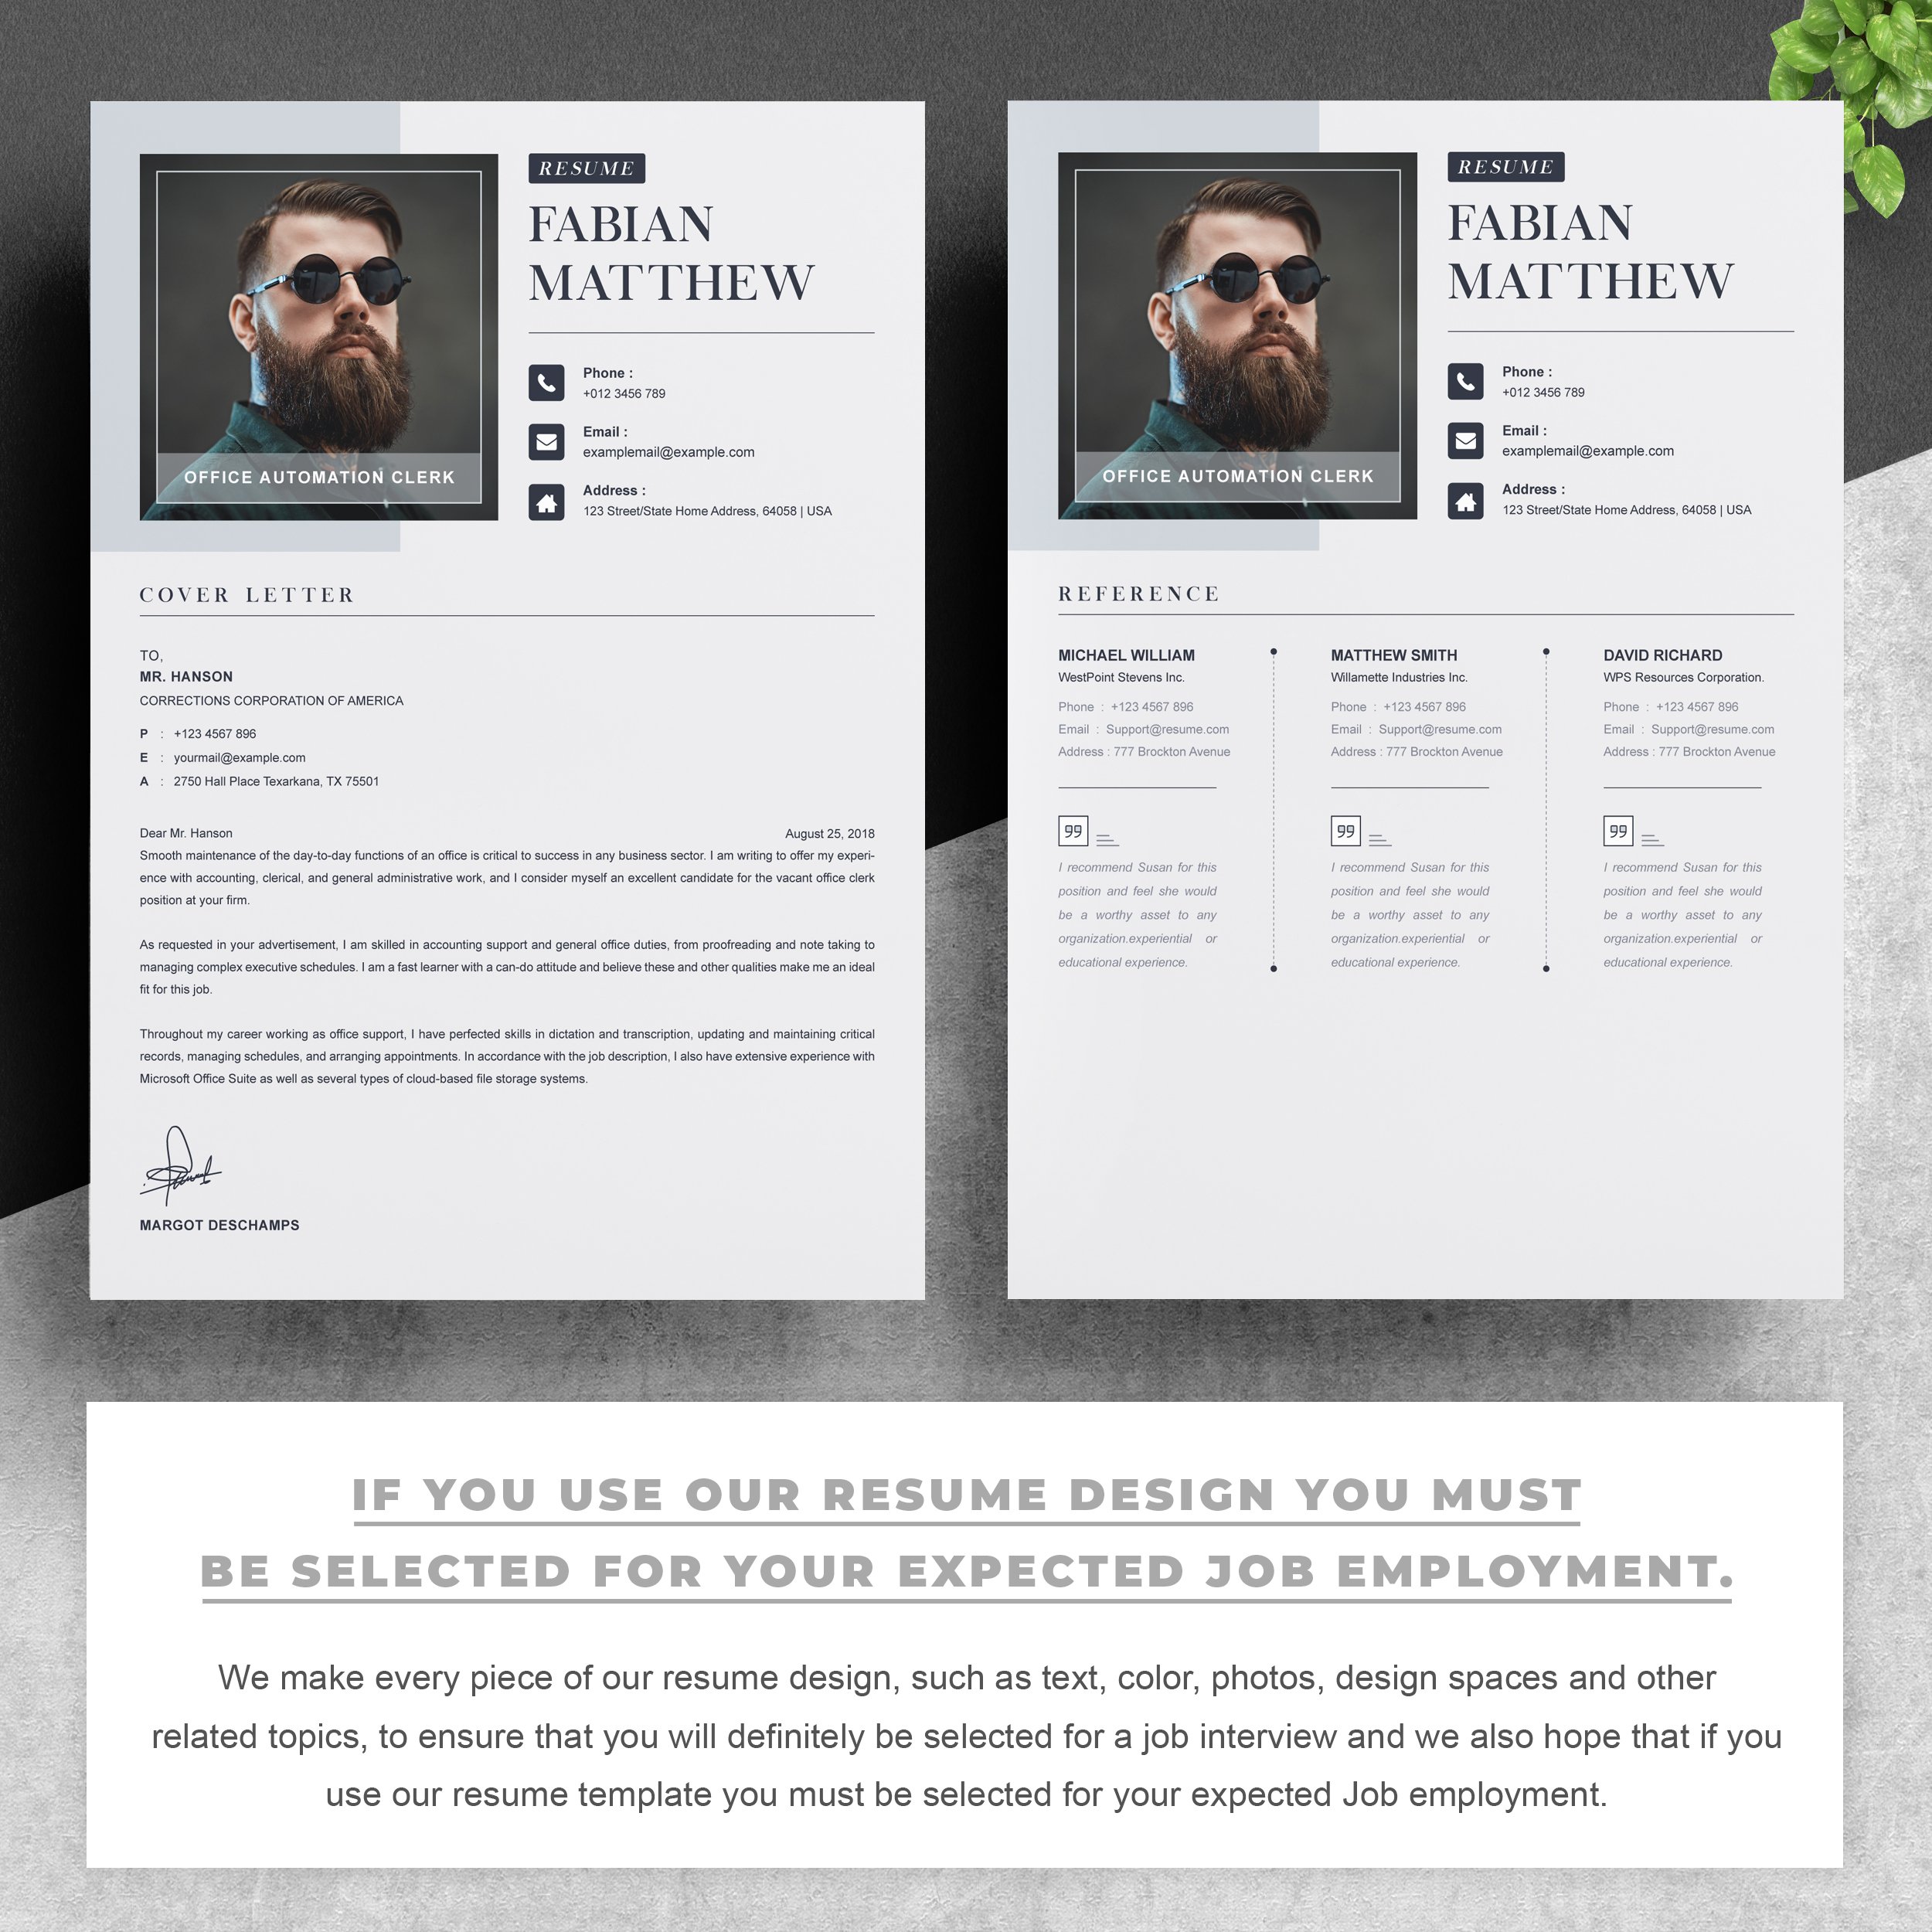 03 2 pages free resume design template copy 997